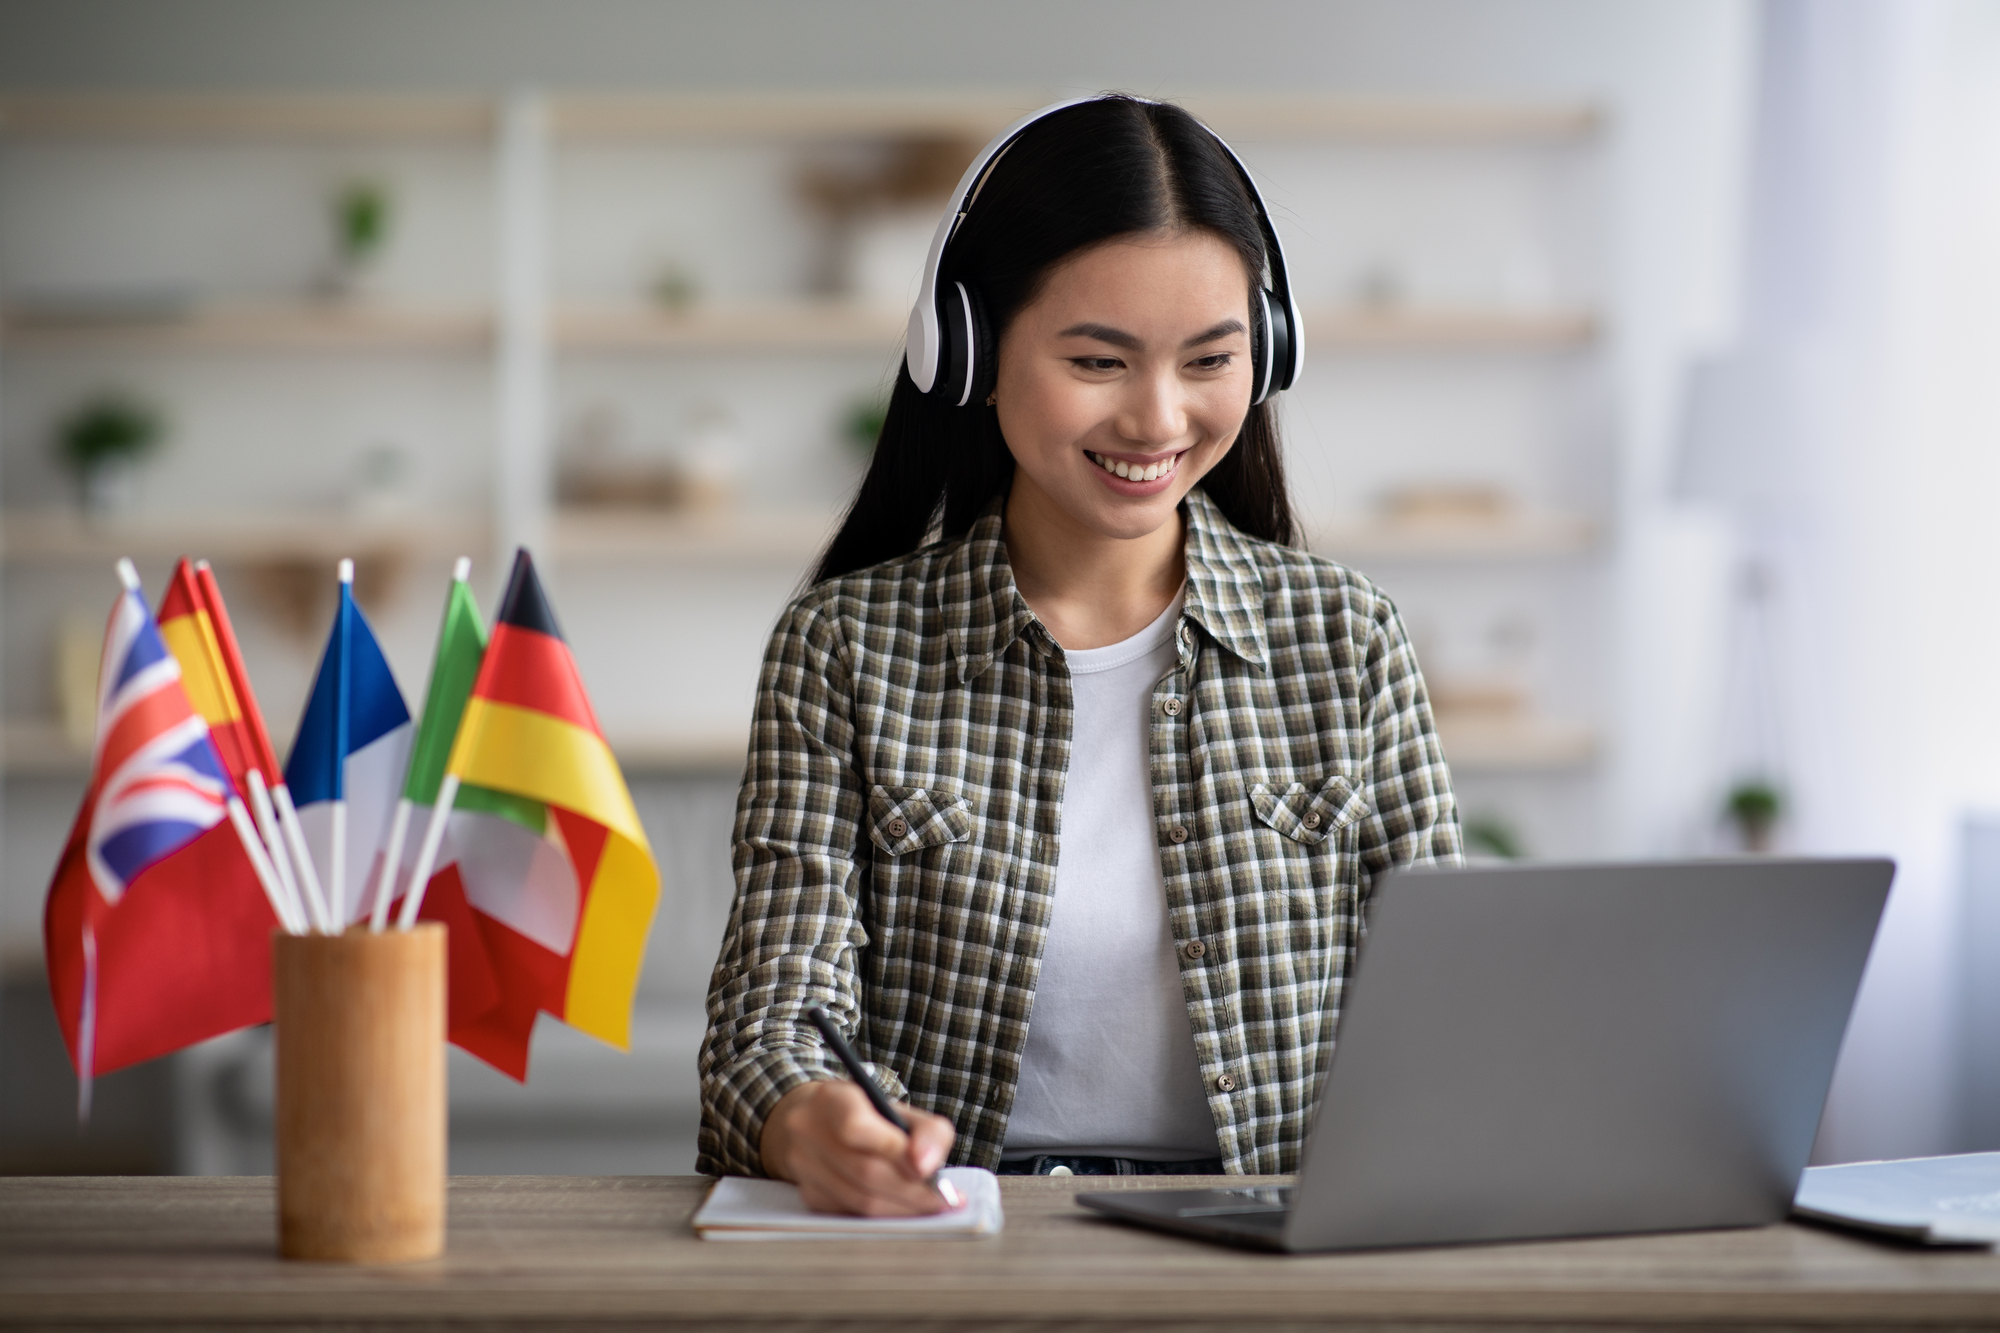 A woman with headphones is sitting at a desk with international flags in front of her, teaching English as her online student job.